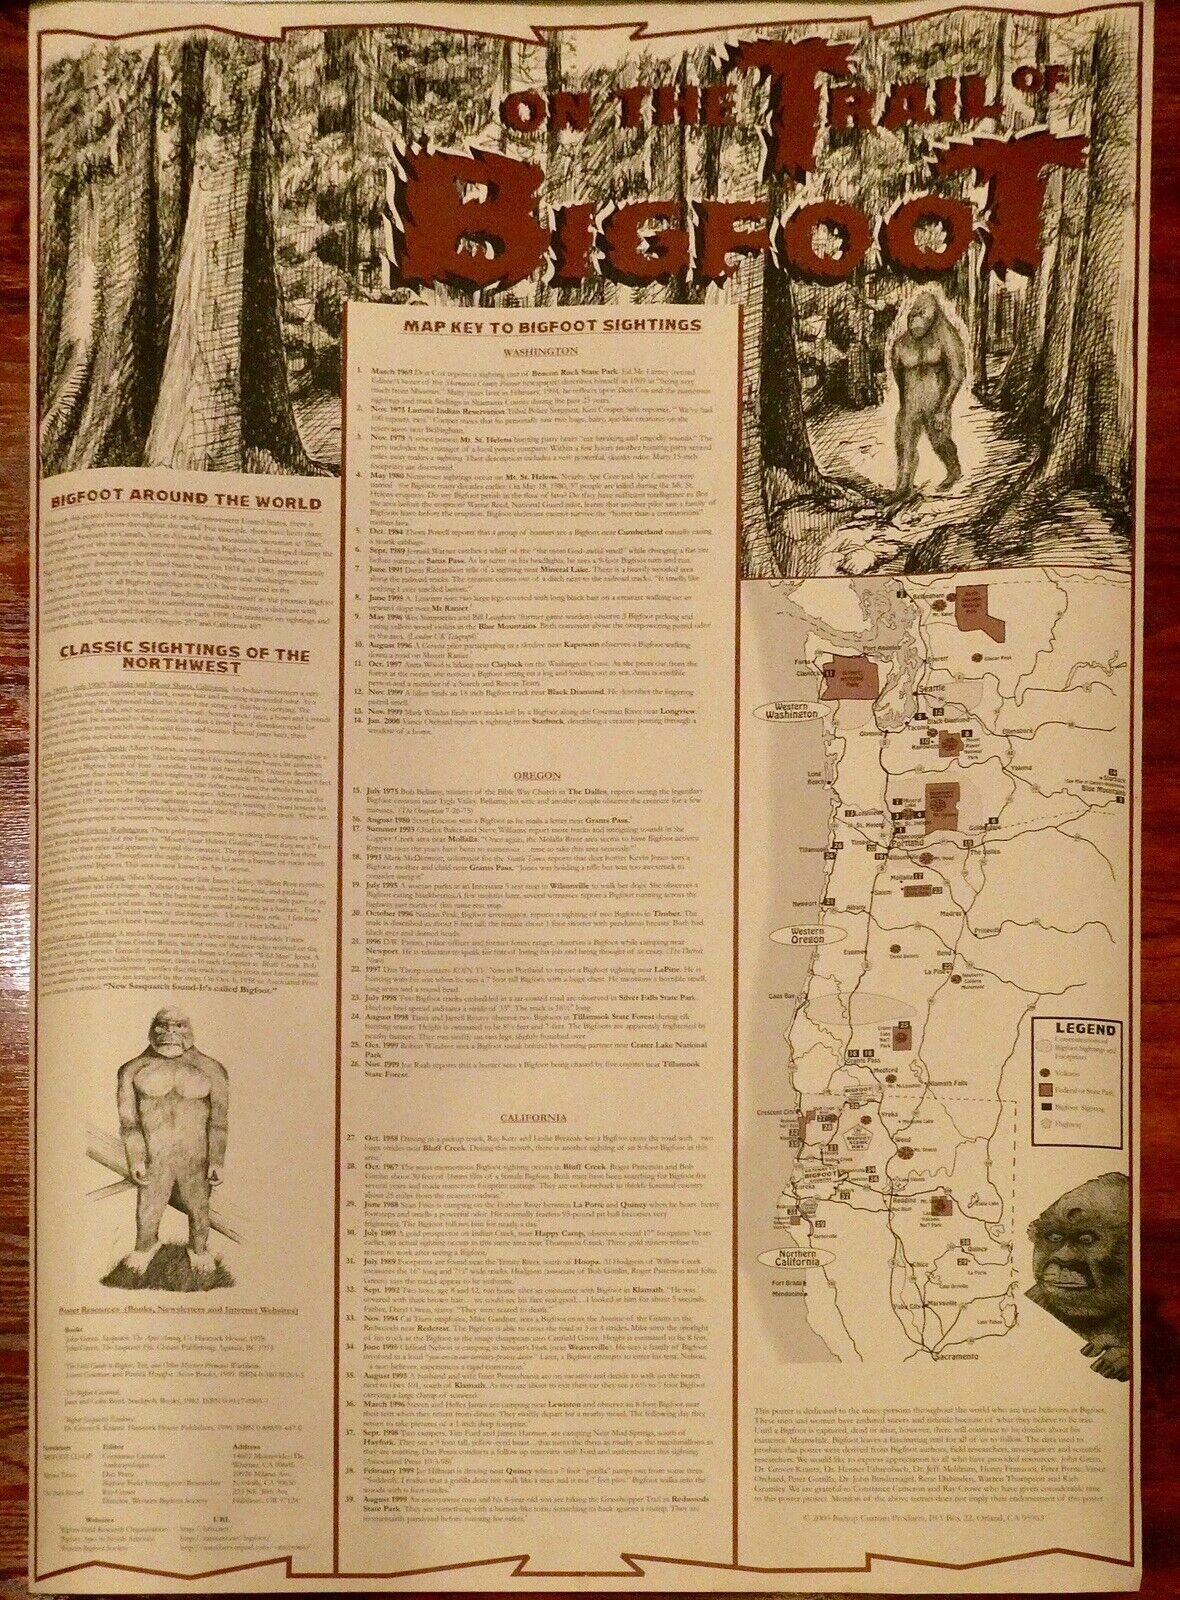 Vintage 2000, 24” x 35” the original, colorful “On The Trail Of Bigfoot” poster